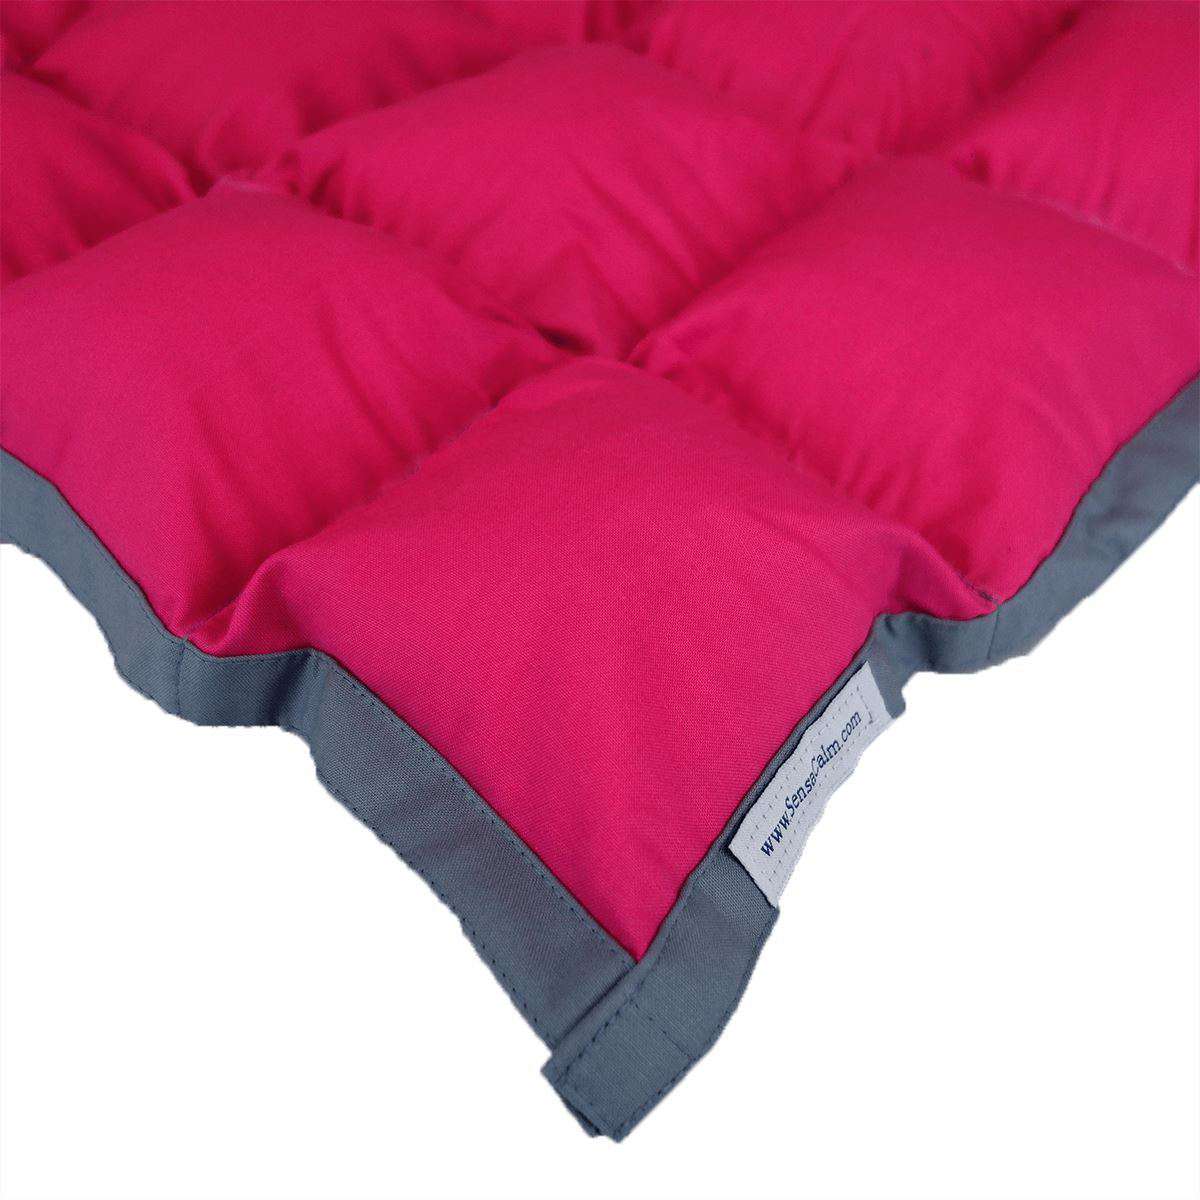 SensaCalm Clearance Waterproof Weighted Blanket - Medium 10 lb Raspberry and Slate Gray (for 80 lb user) MULTIPLES AVAILABLE. Clearance Weighted Blanket